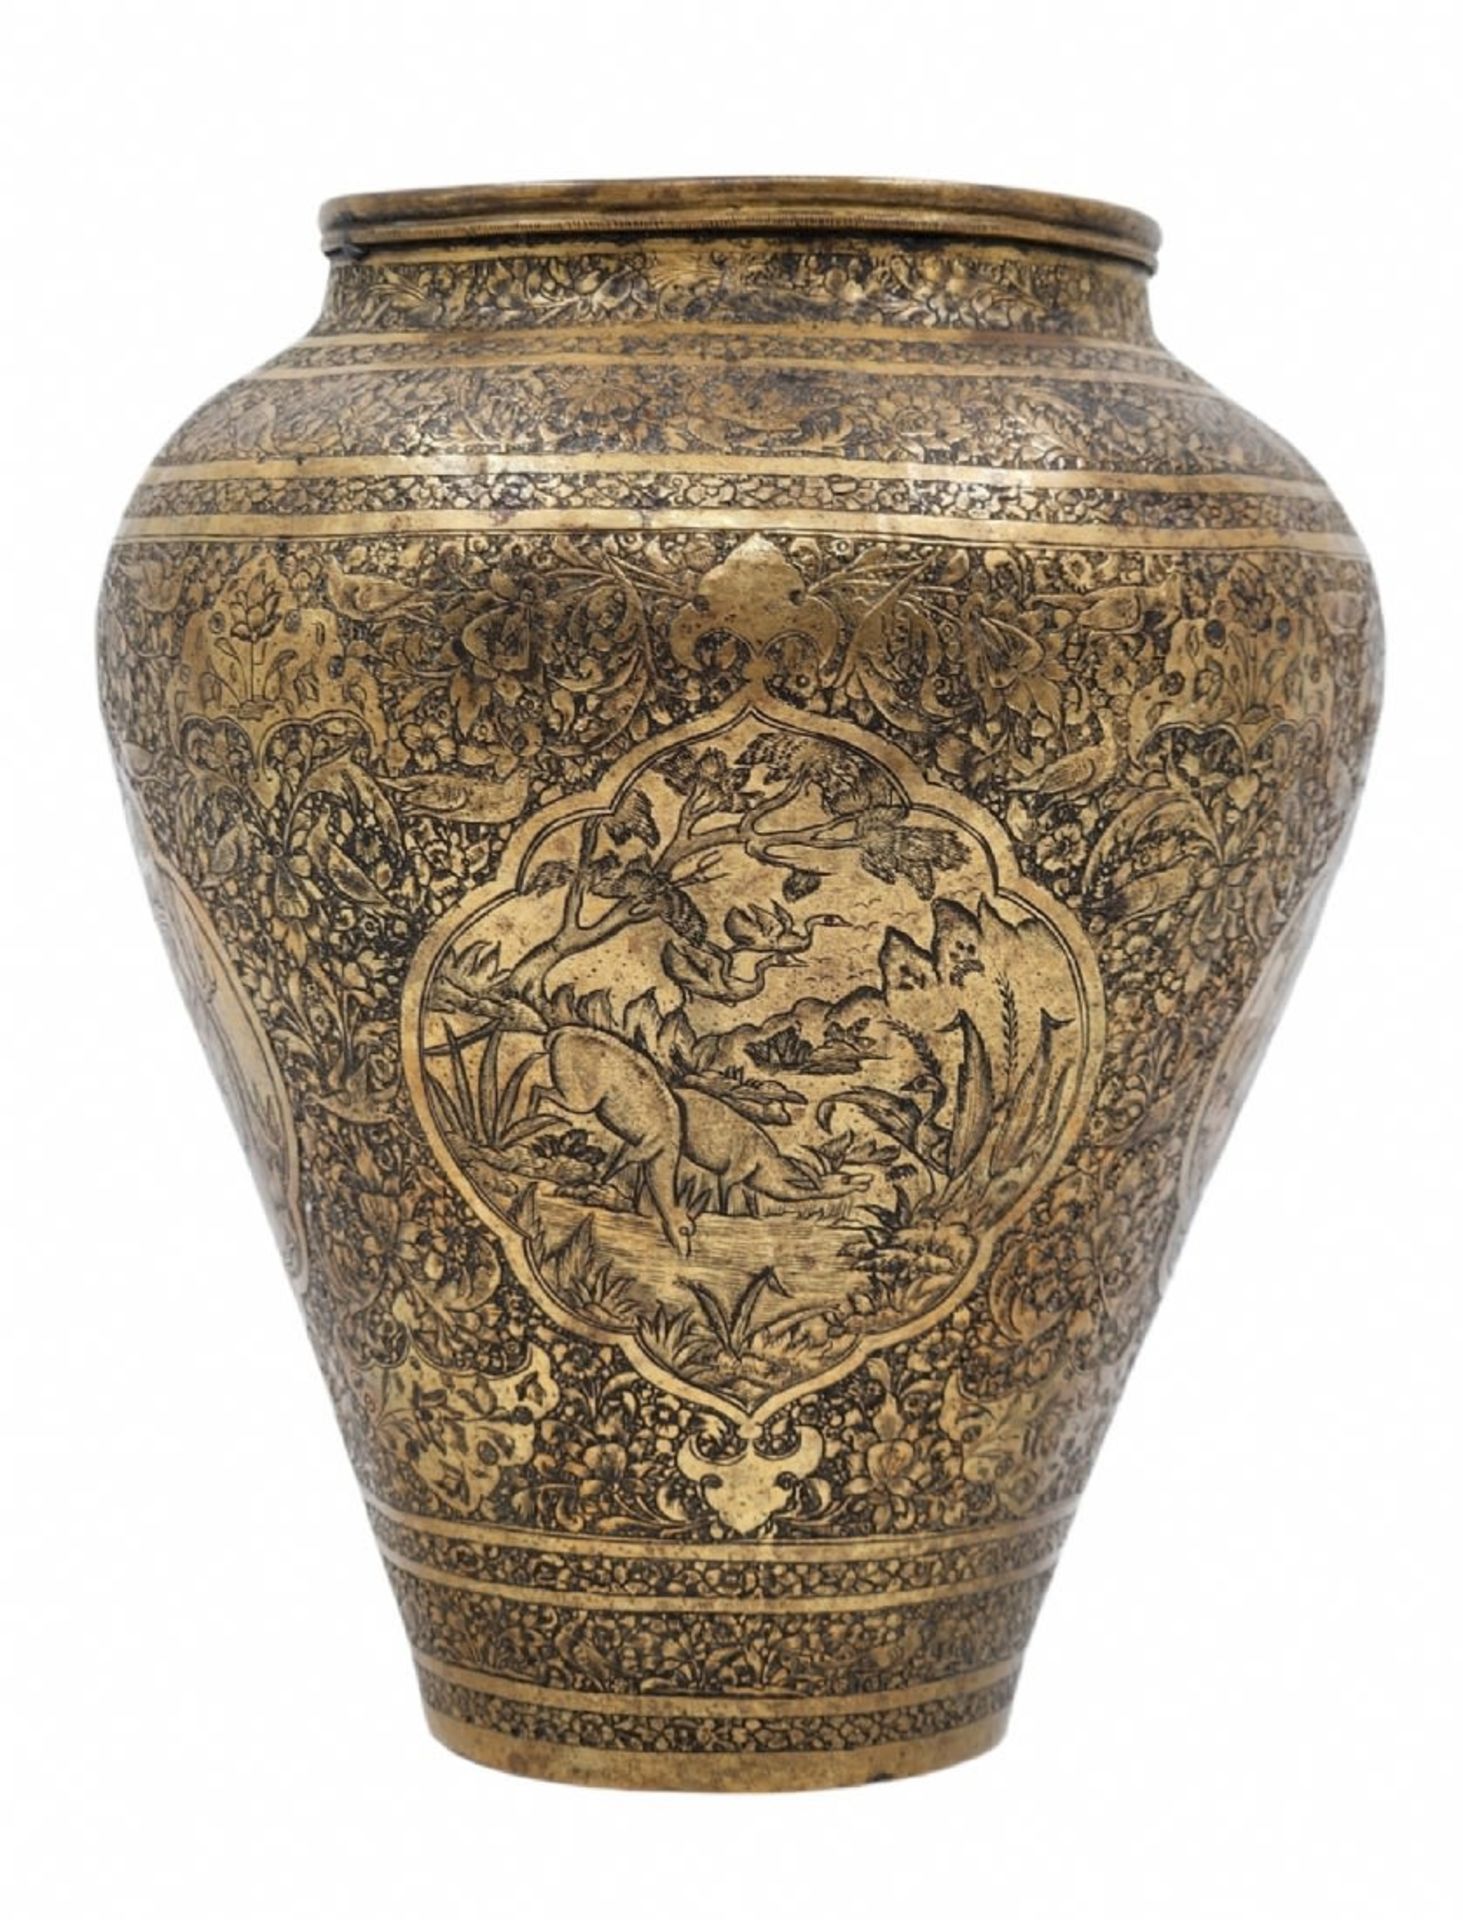 An antique Persian urn, an urn from the 19th century, made of brass and decorated with delicate